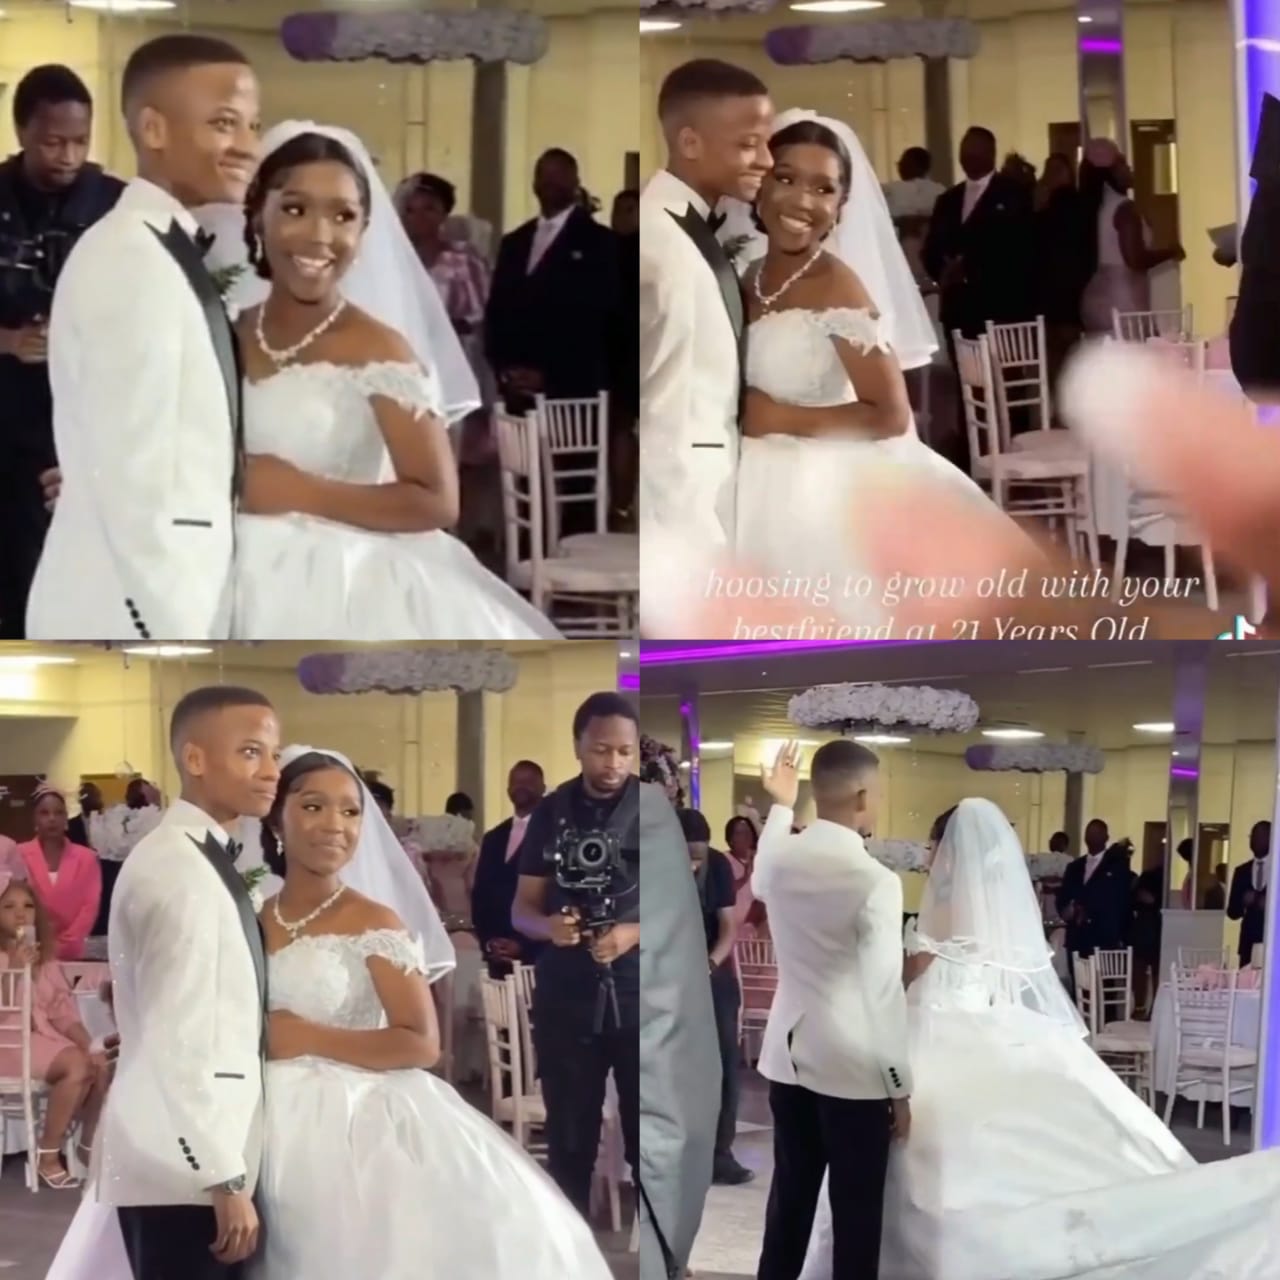 See Reactions As Trending Video of 21 year-old Couple at Their Wedding  Surfaces Online